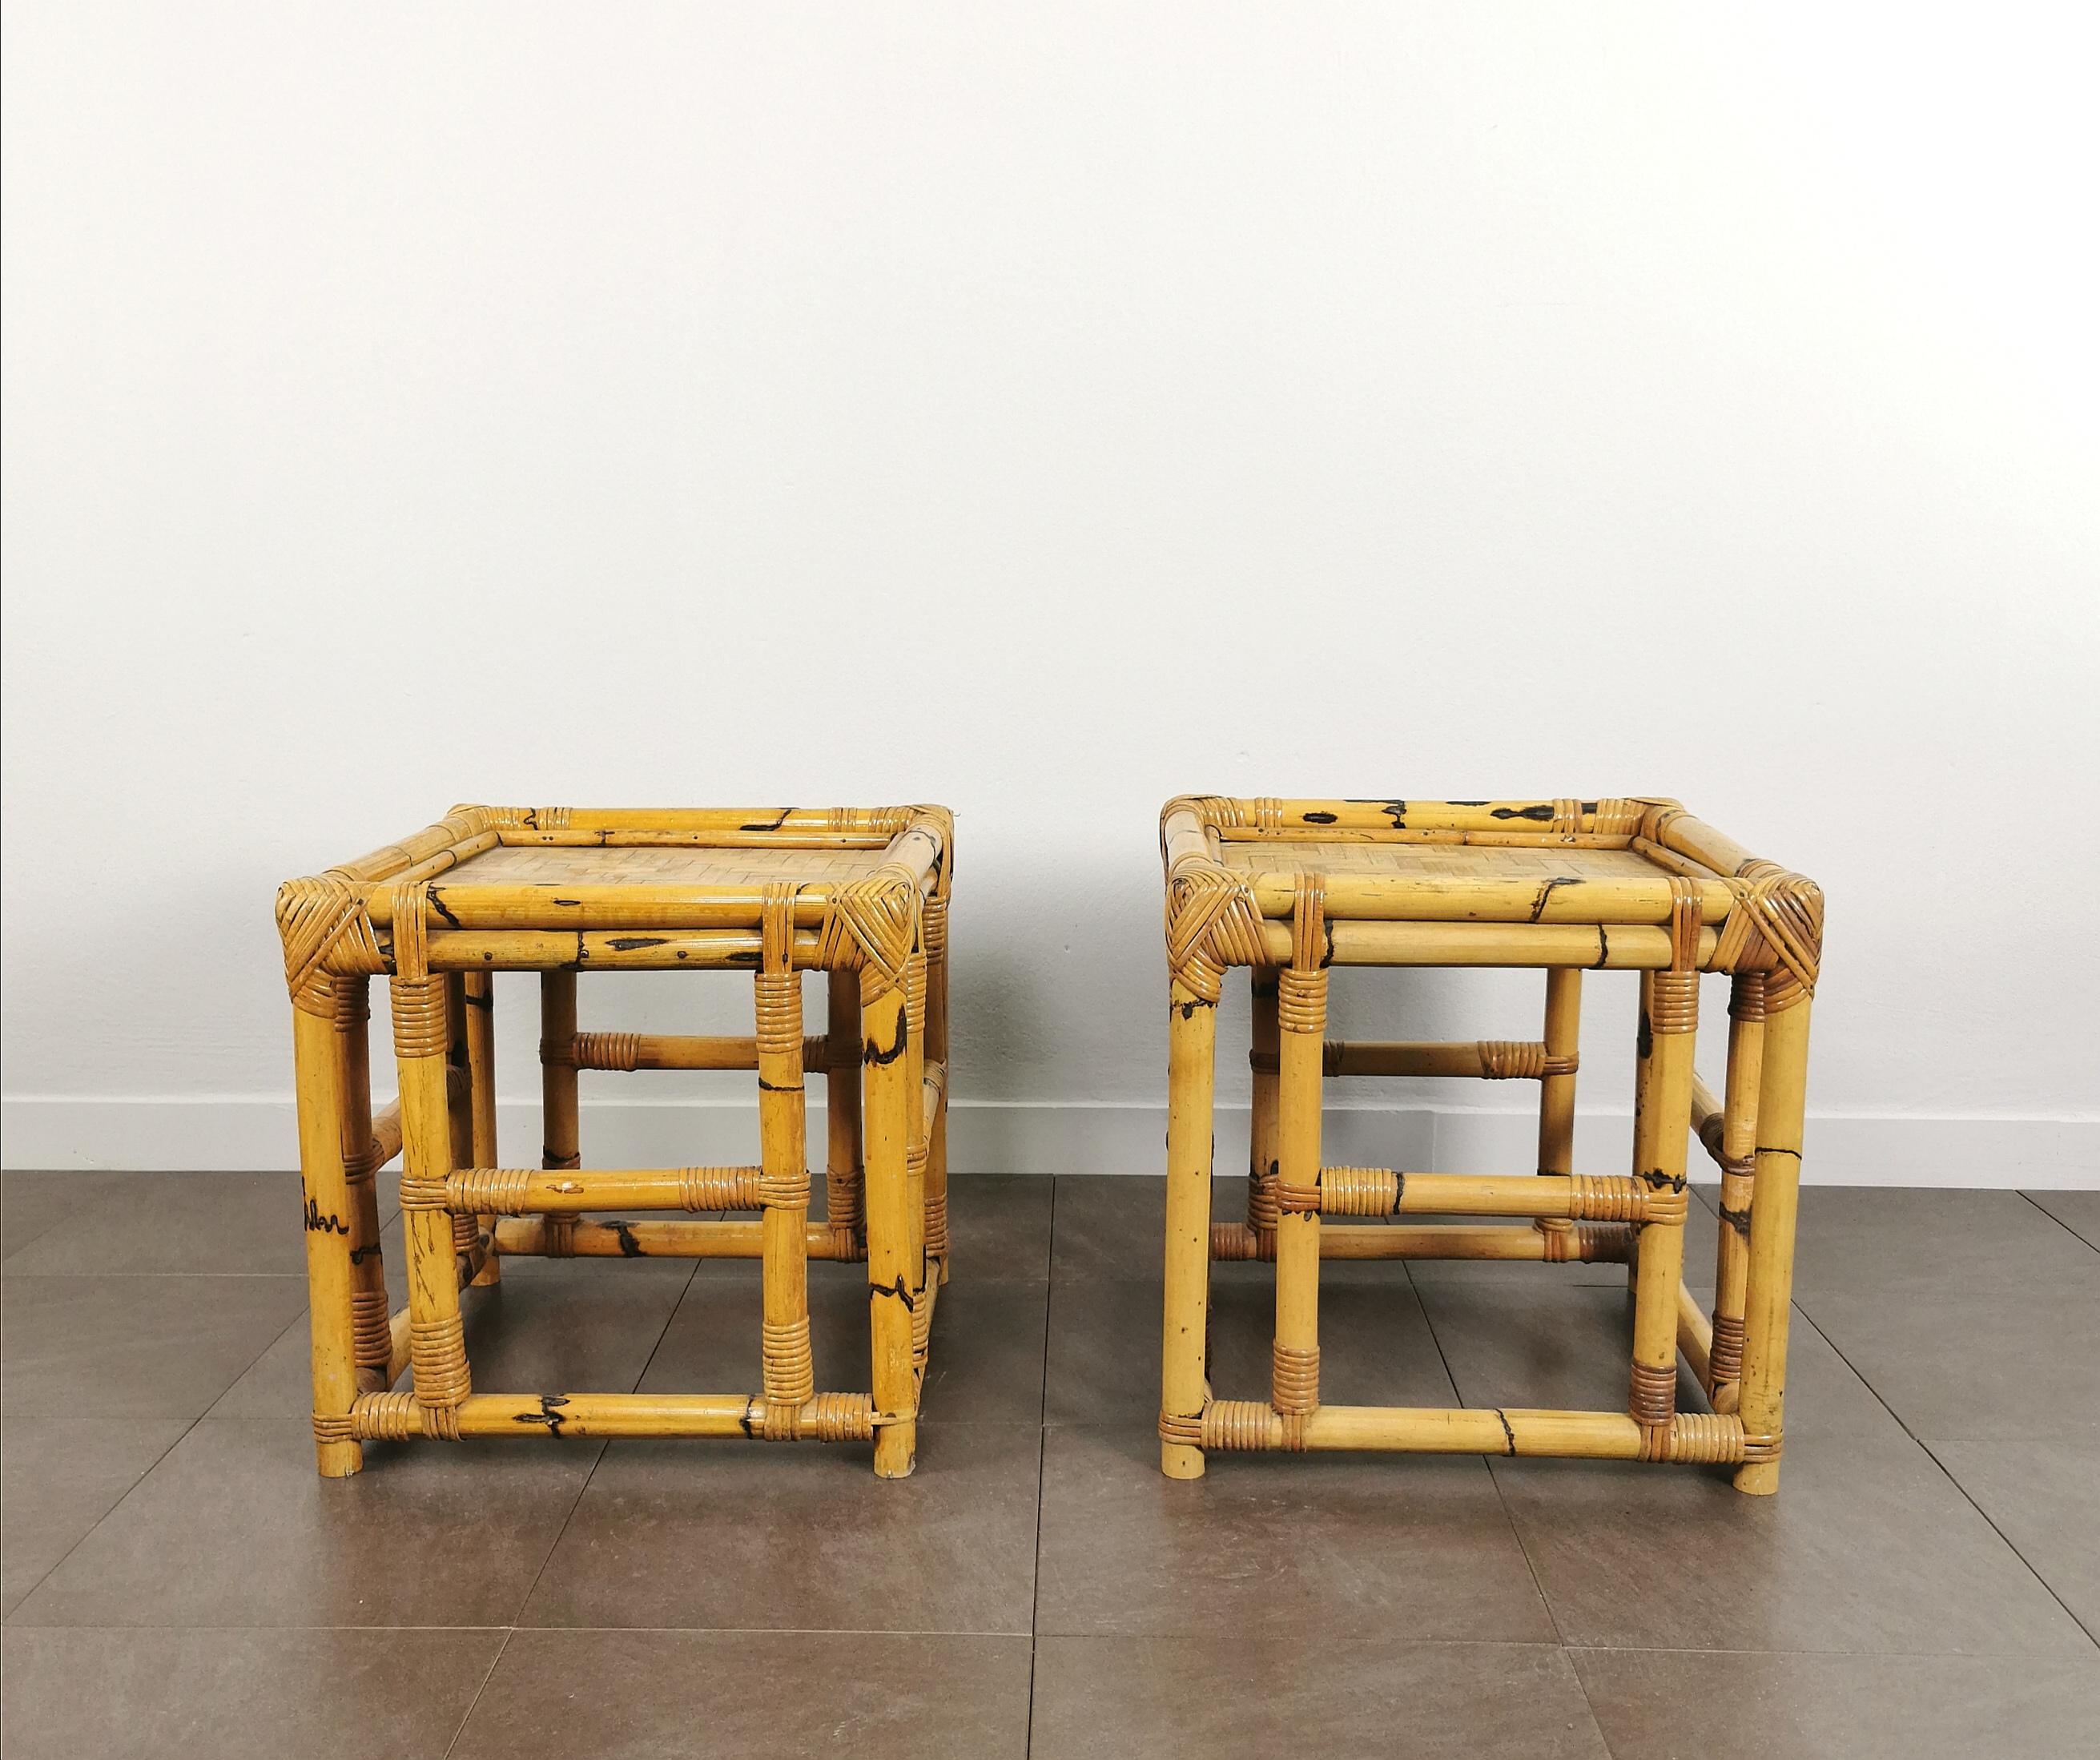 Pair of Coffee Tables Bamboo Cubic Vivai del Sud Midcentury Modern Italy 1970s  For Sale 1